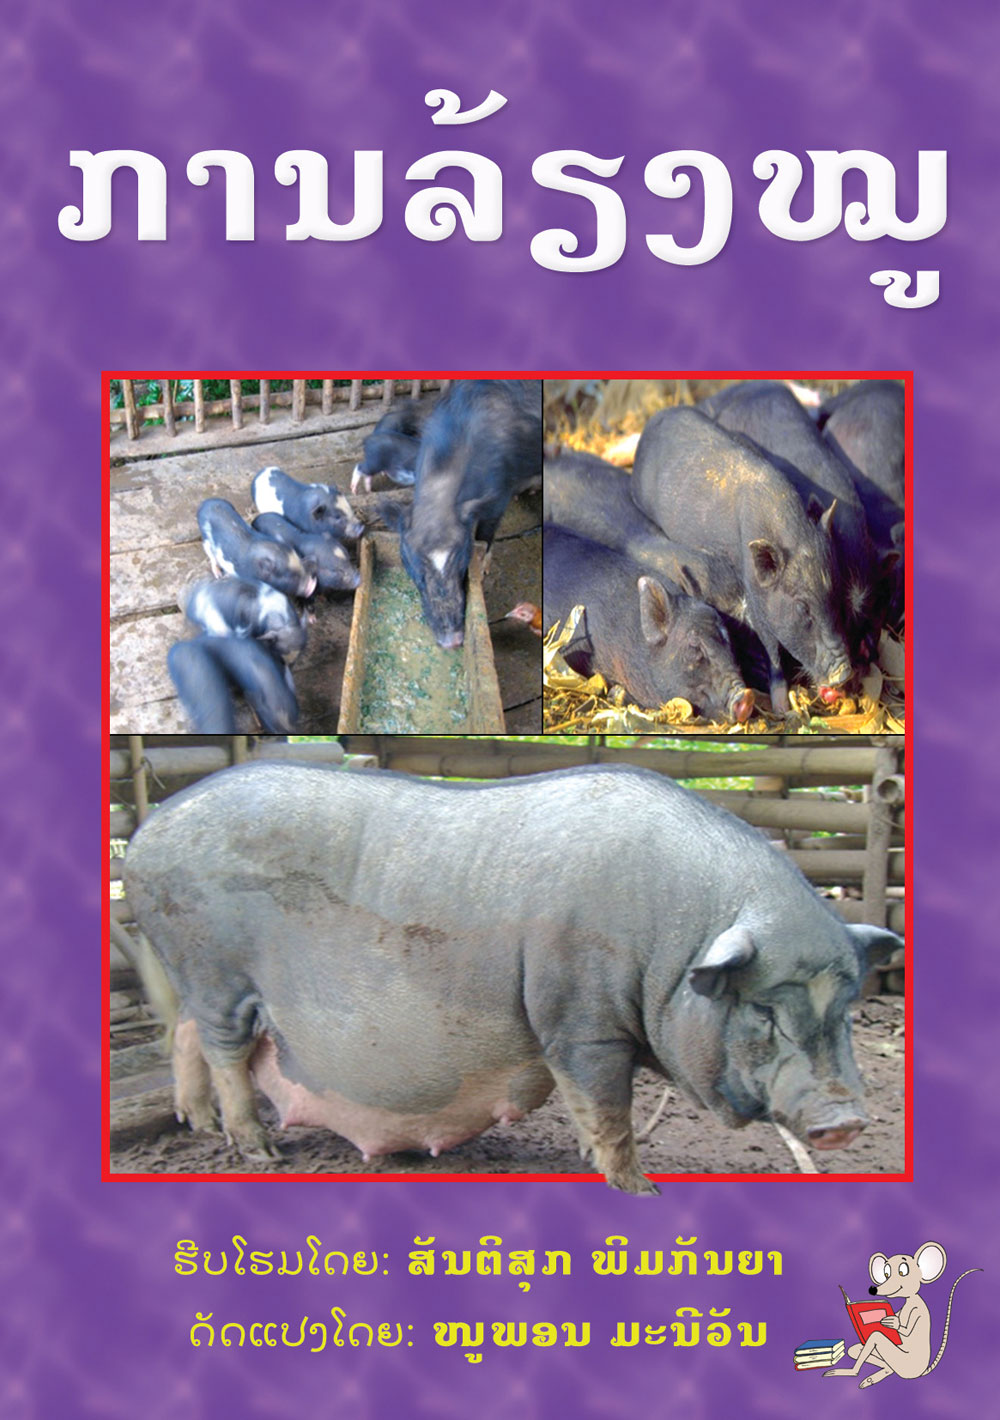 How to Care for Pigs large book cover, published in Lao language